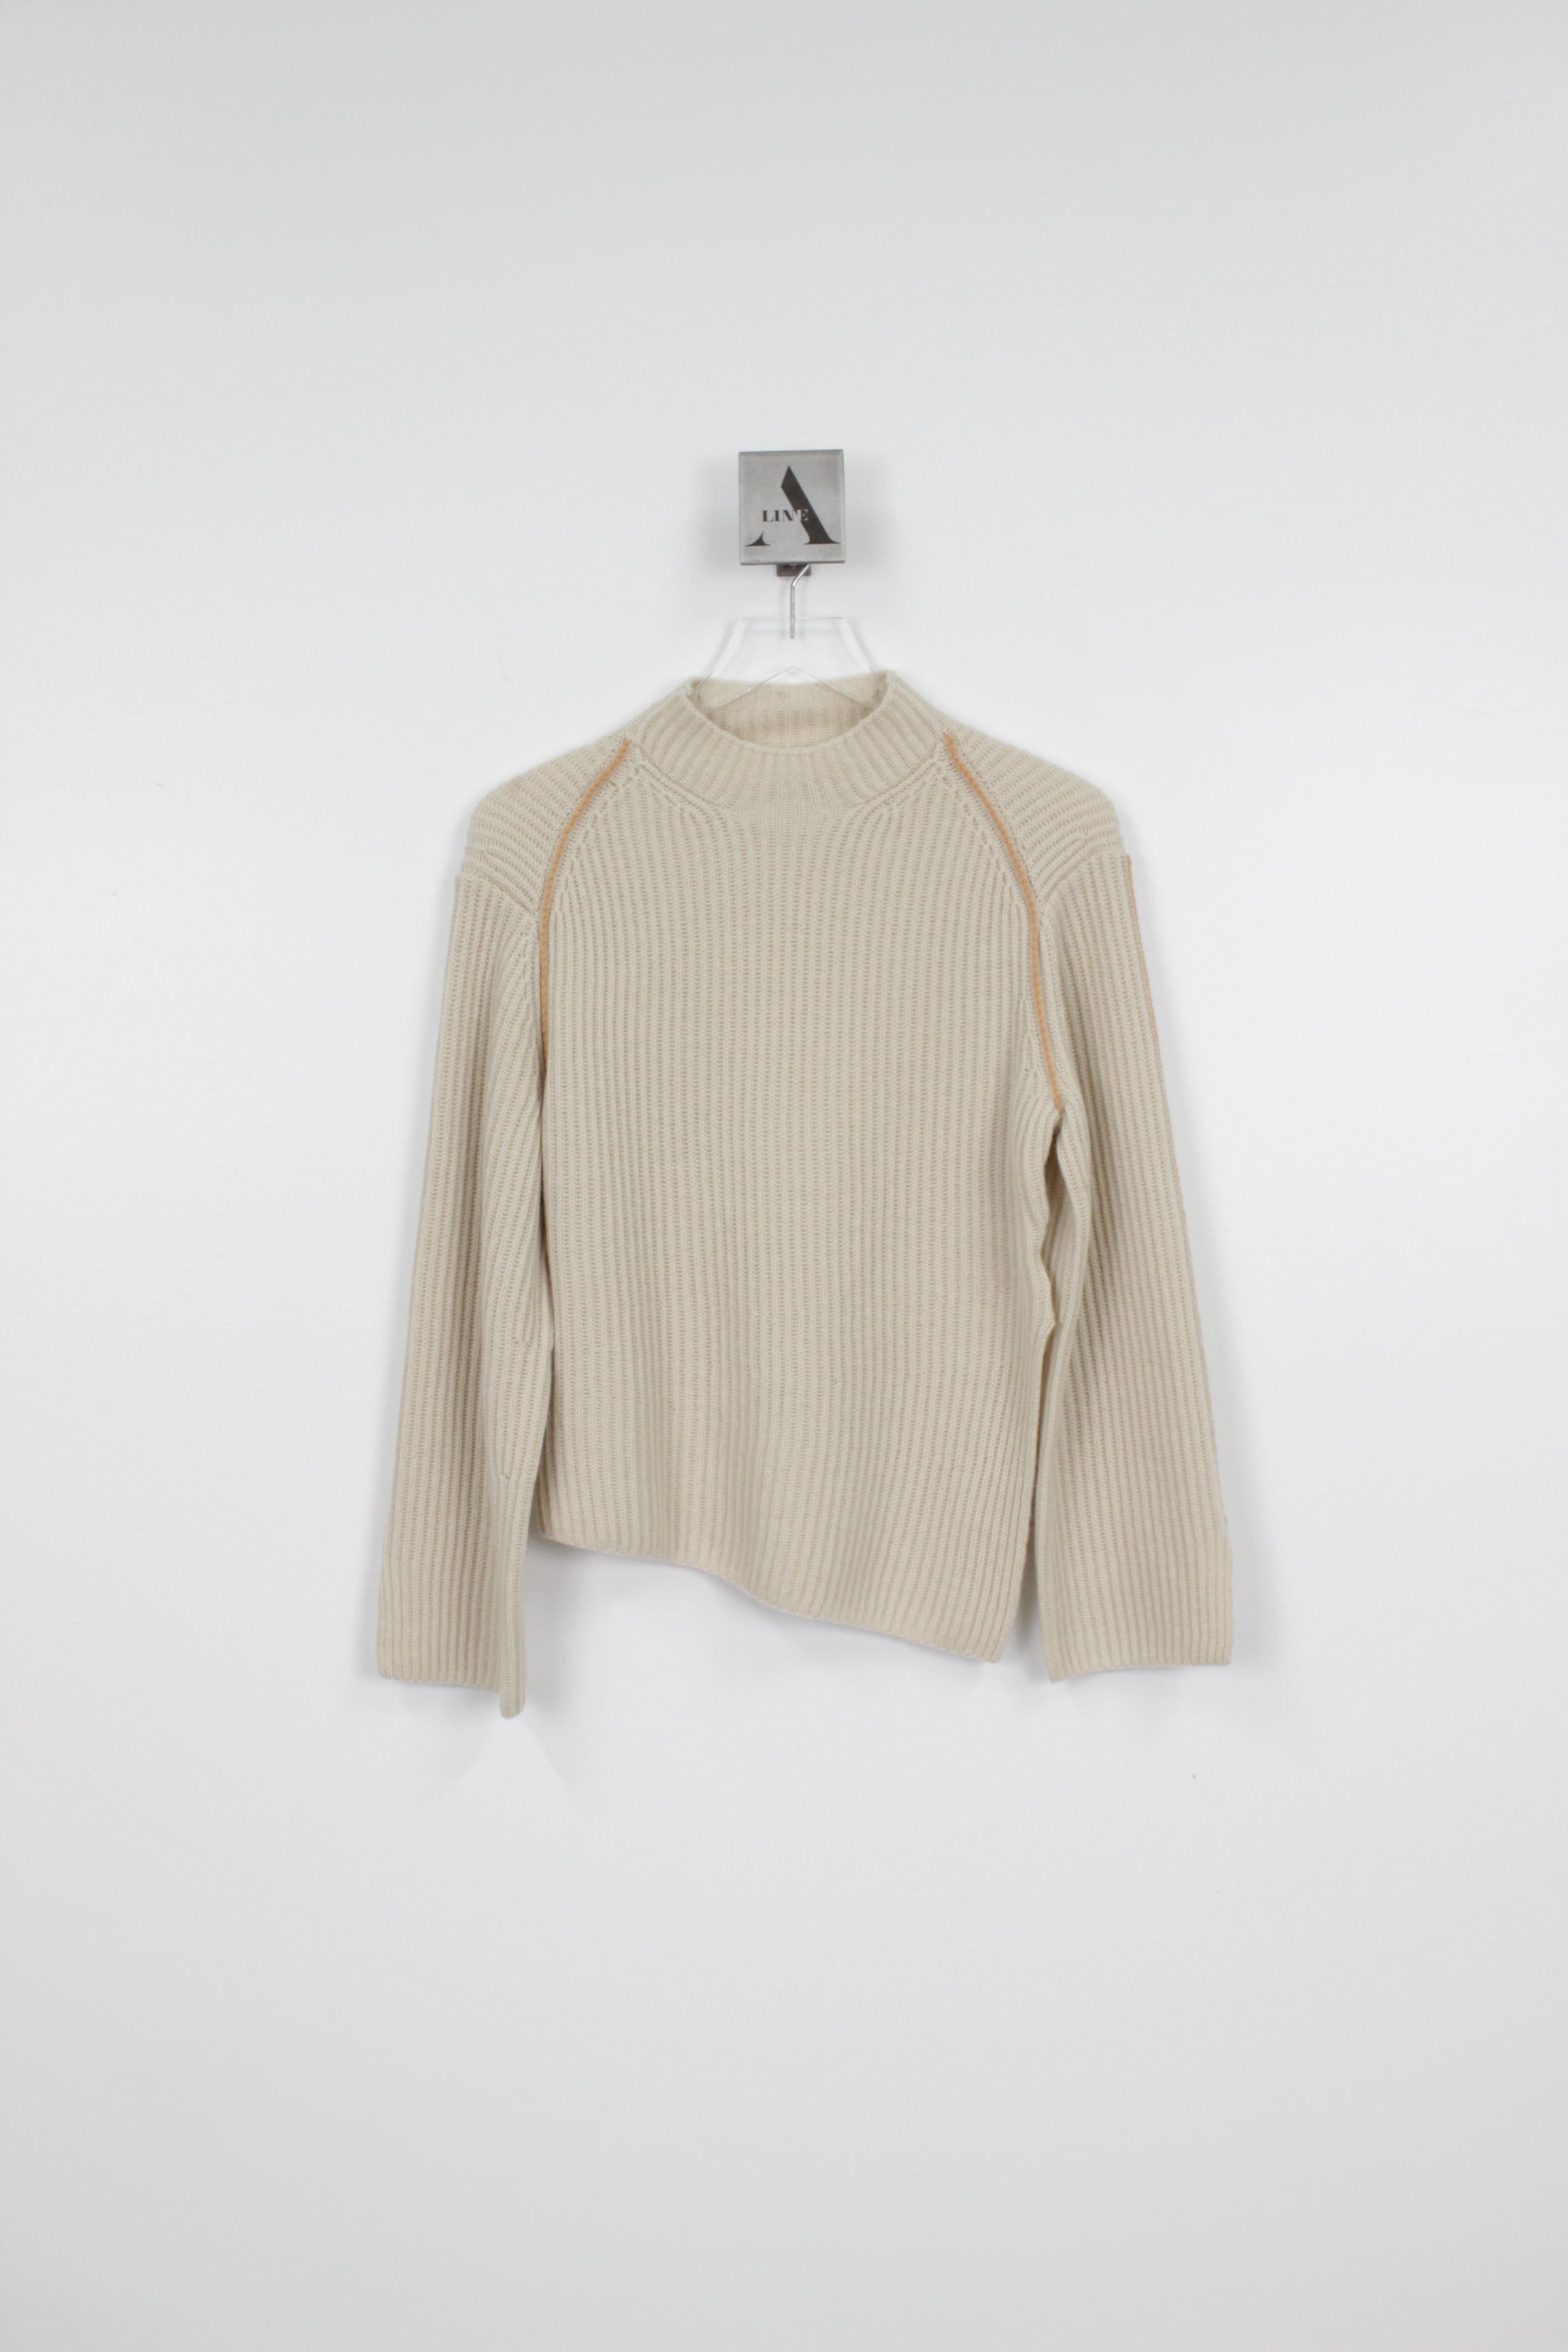 Aliana Recycled Cashmere Asymmetrical Turtleneck Pullover